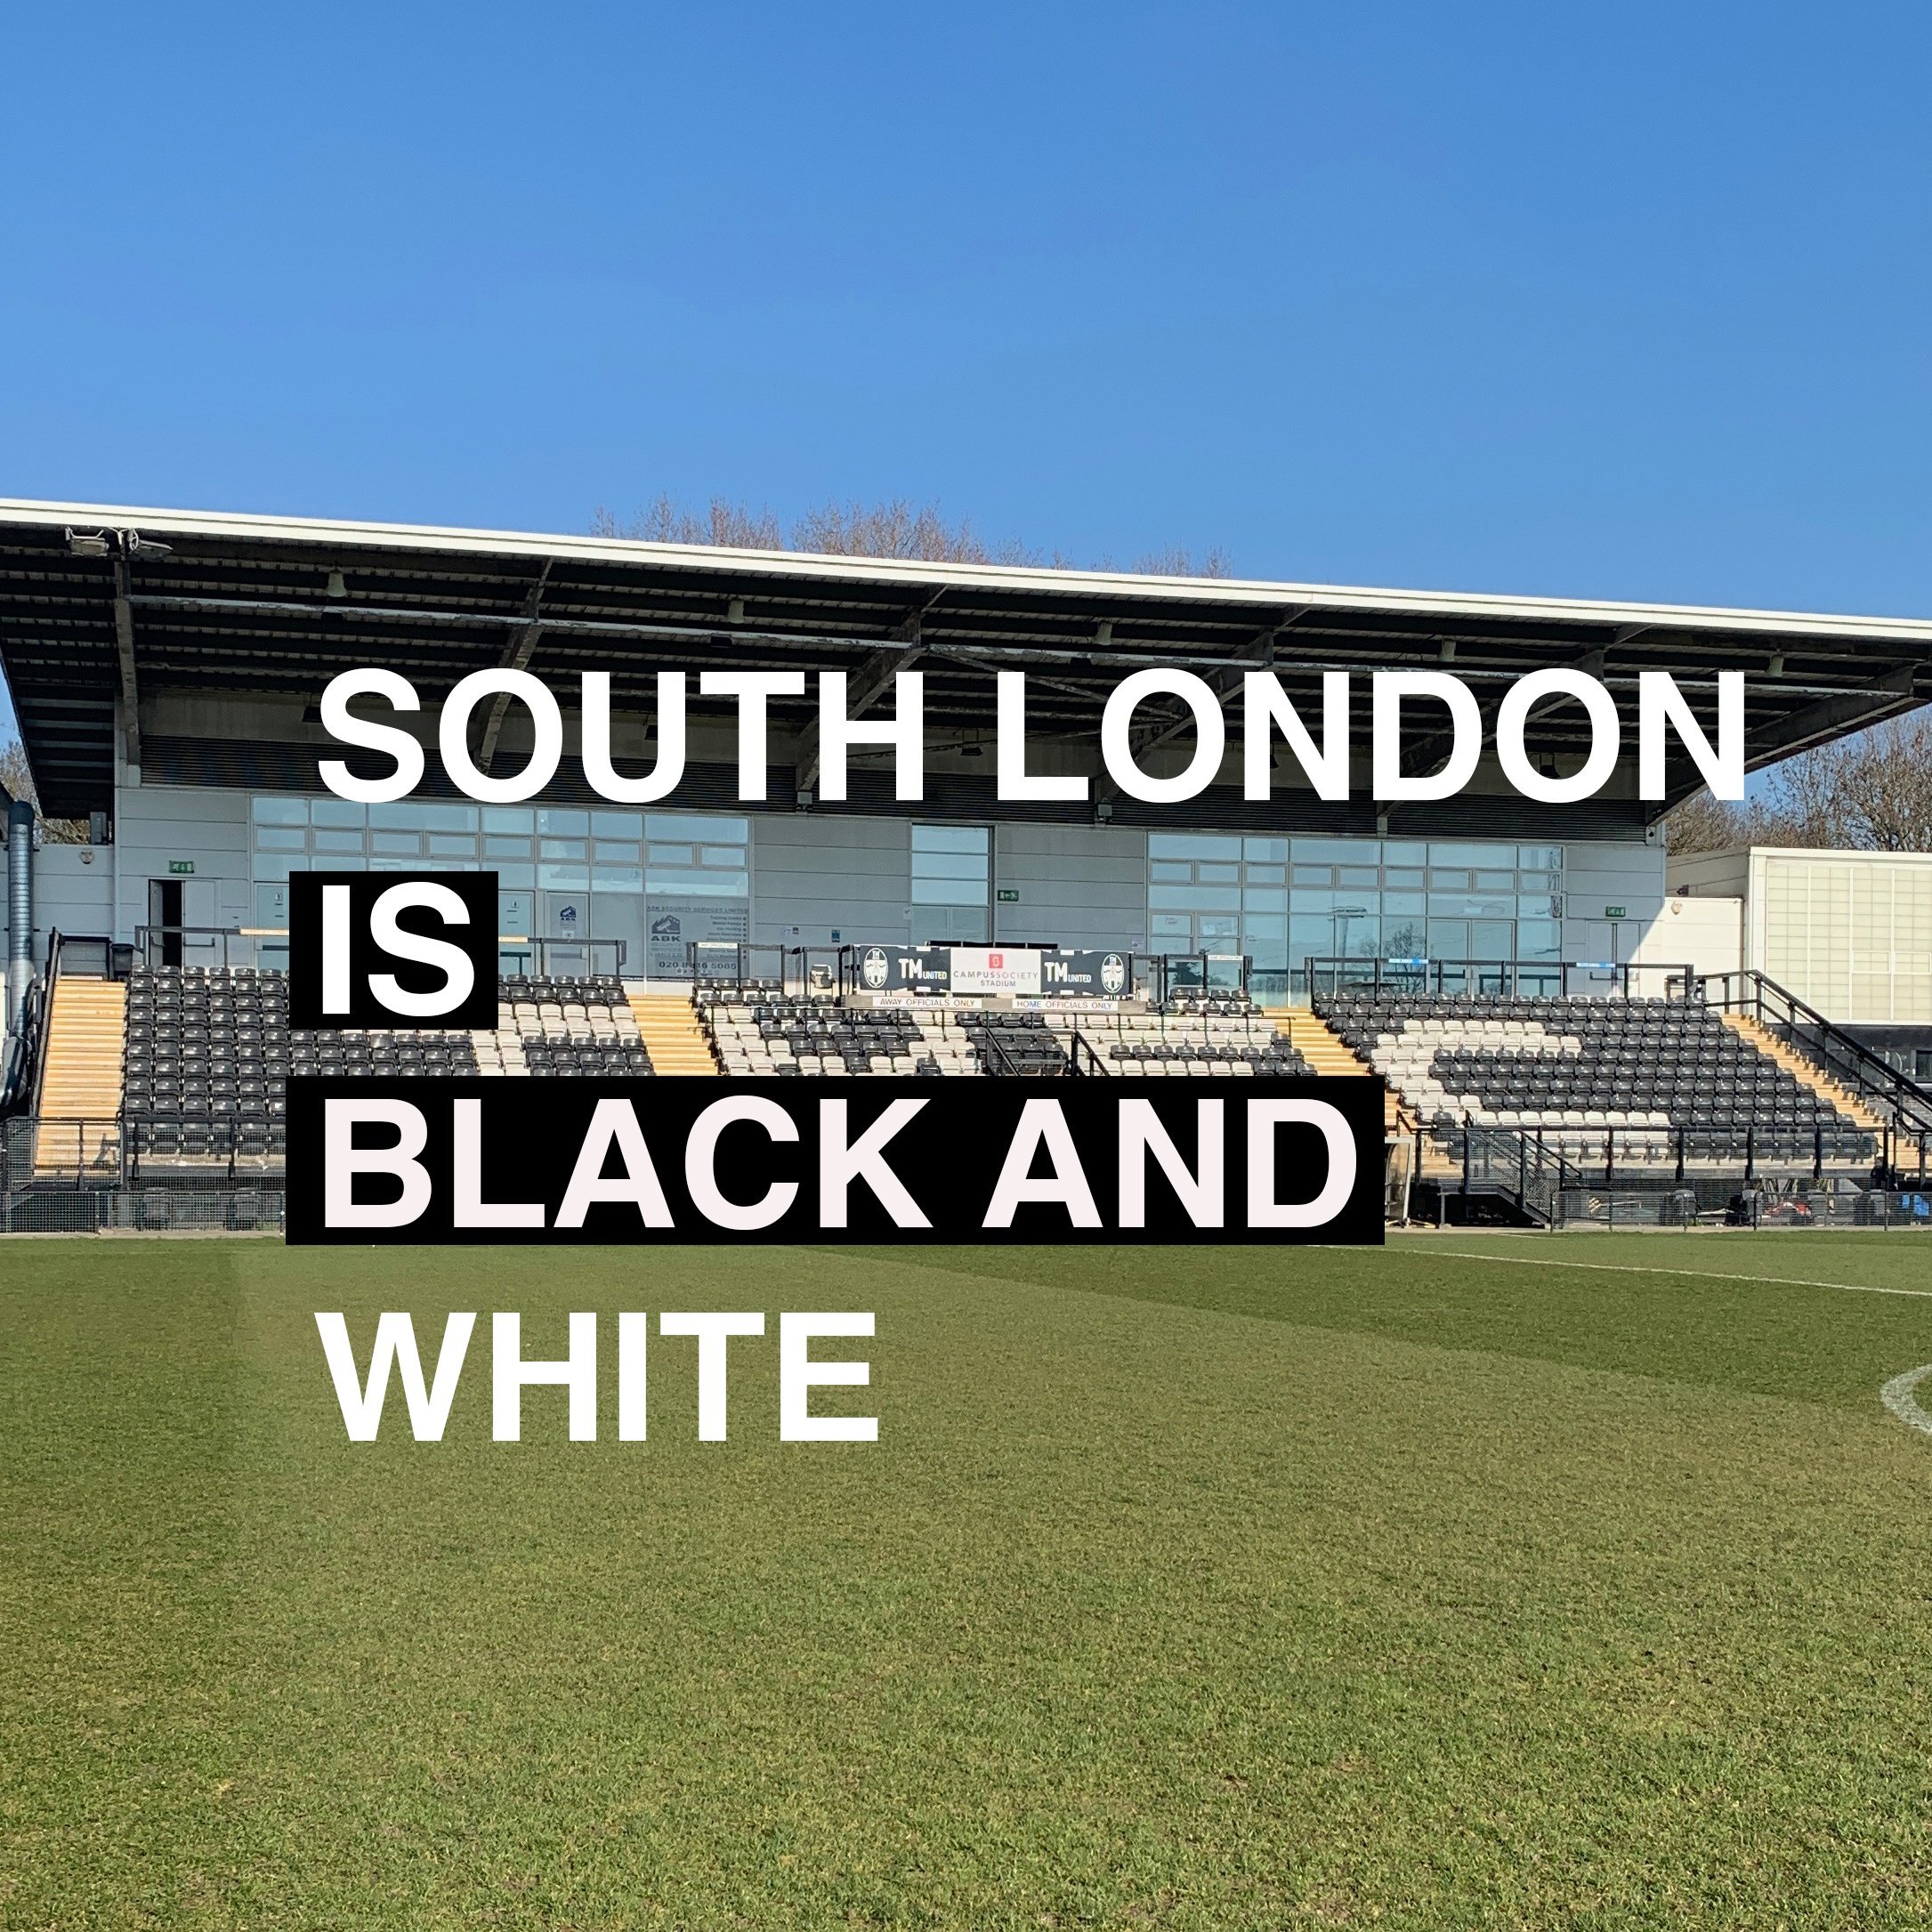 for supporters. by supporters. A site for writing inspired by Tooting & Mitcham United FC #SouthLondonisBlackandWhite